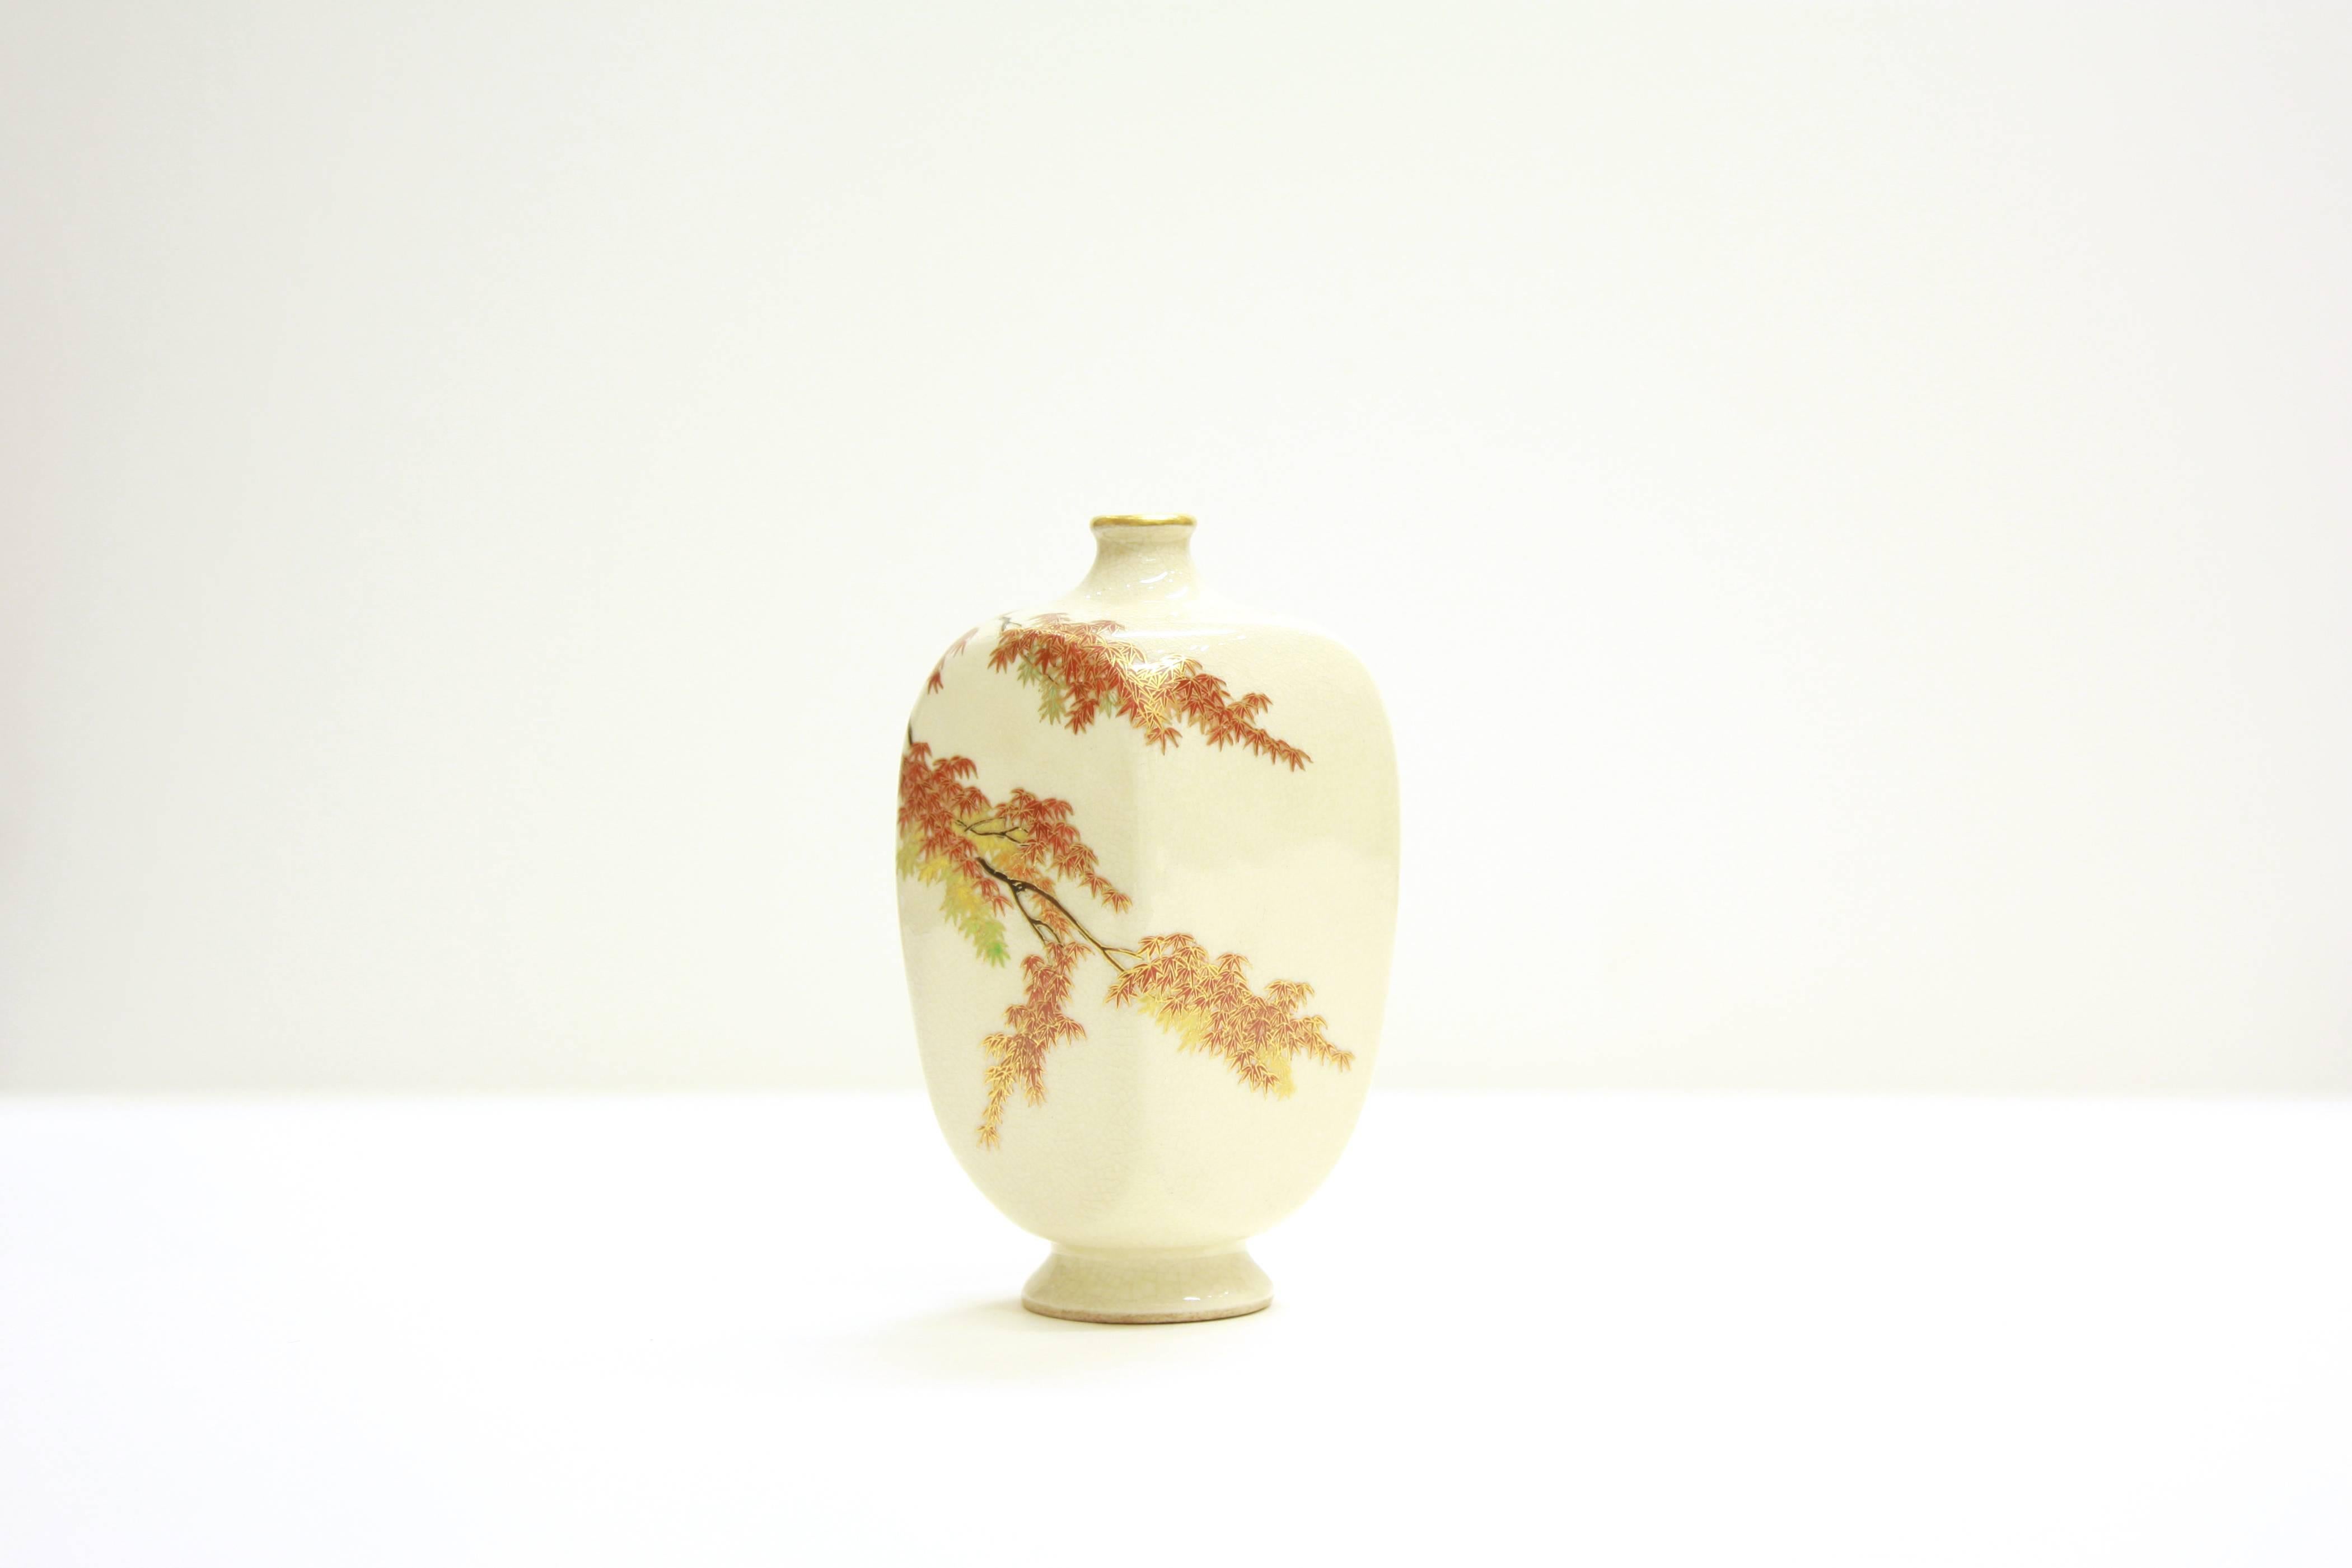 Yabu Meizan was considered to be one of the greatest ceramic artists of Japan during the 19th and 20th century. He was born in Osaka in 1853 and studied painting techniques on ceramics in Tokyo, returning to Osaka, where he established his workshop,